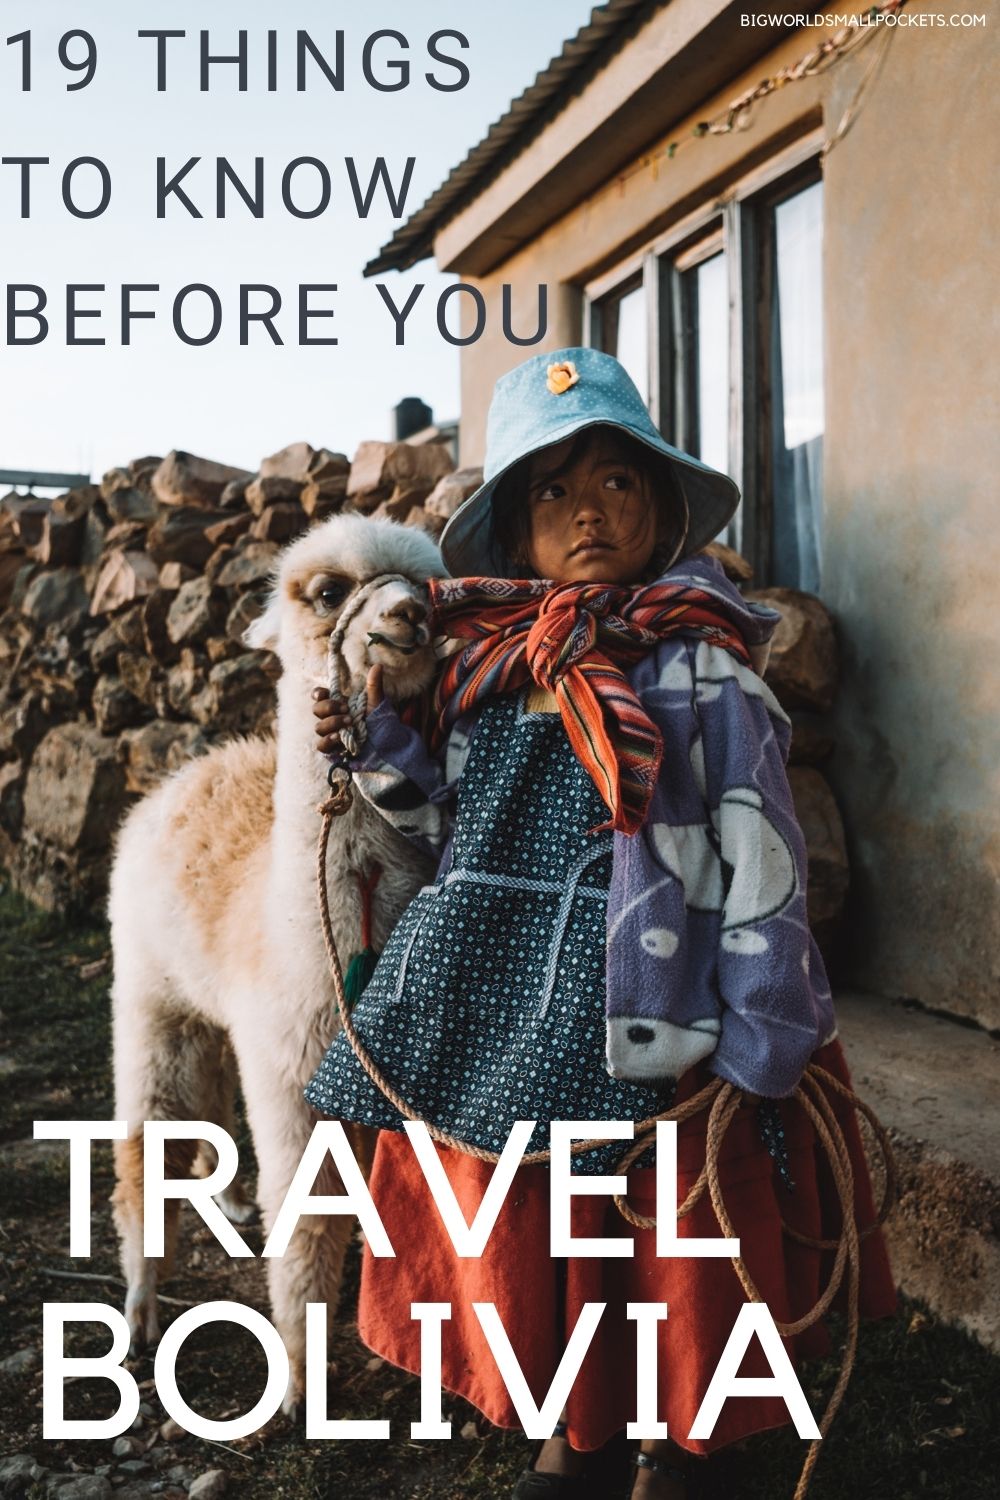 19 Things to Know Before You Travel Bolivia